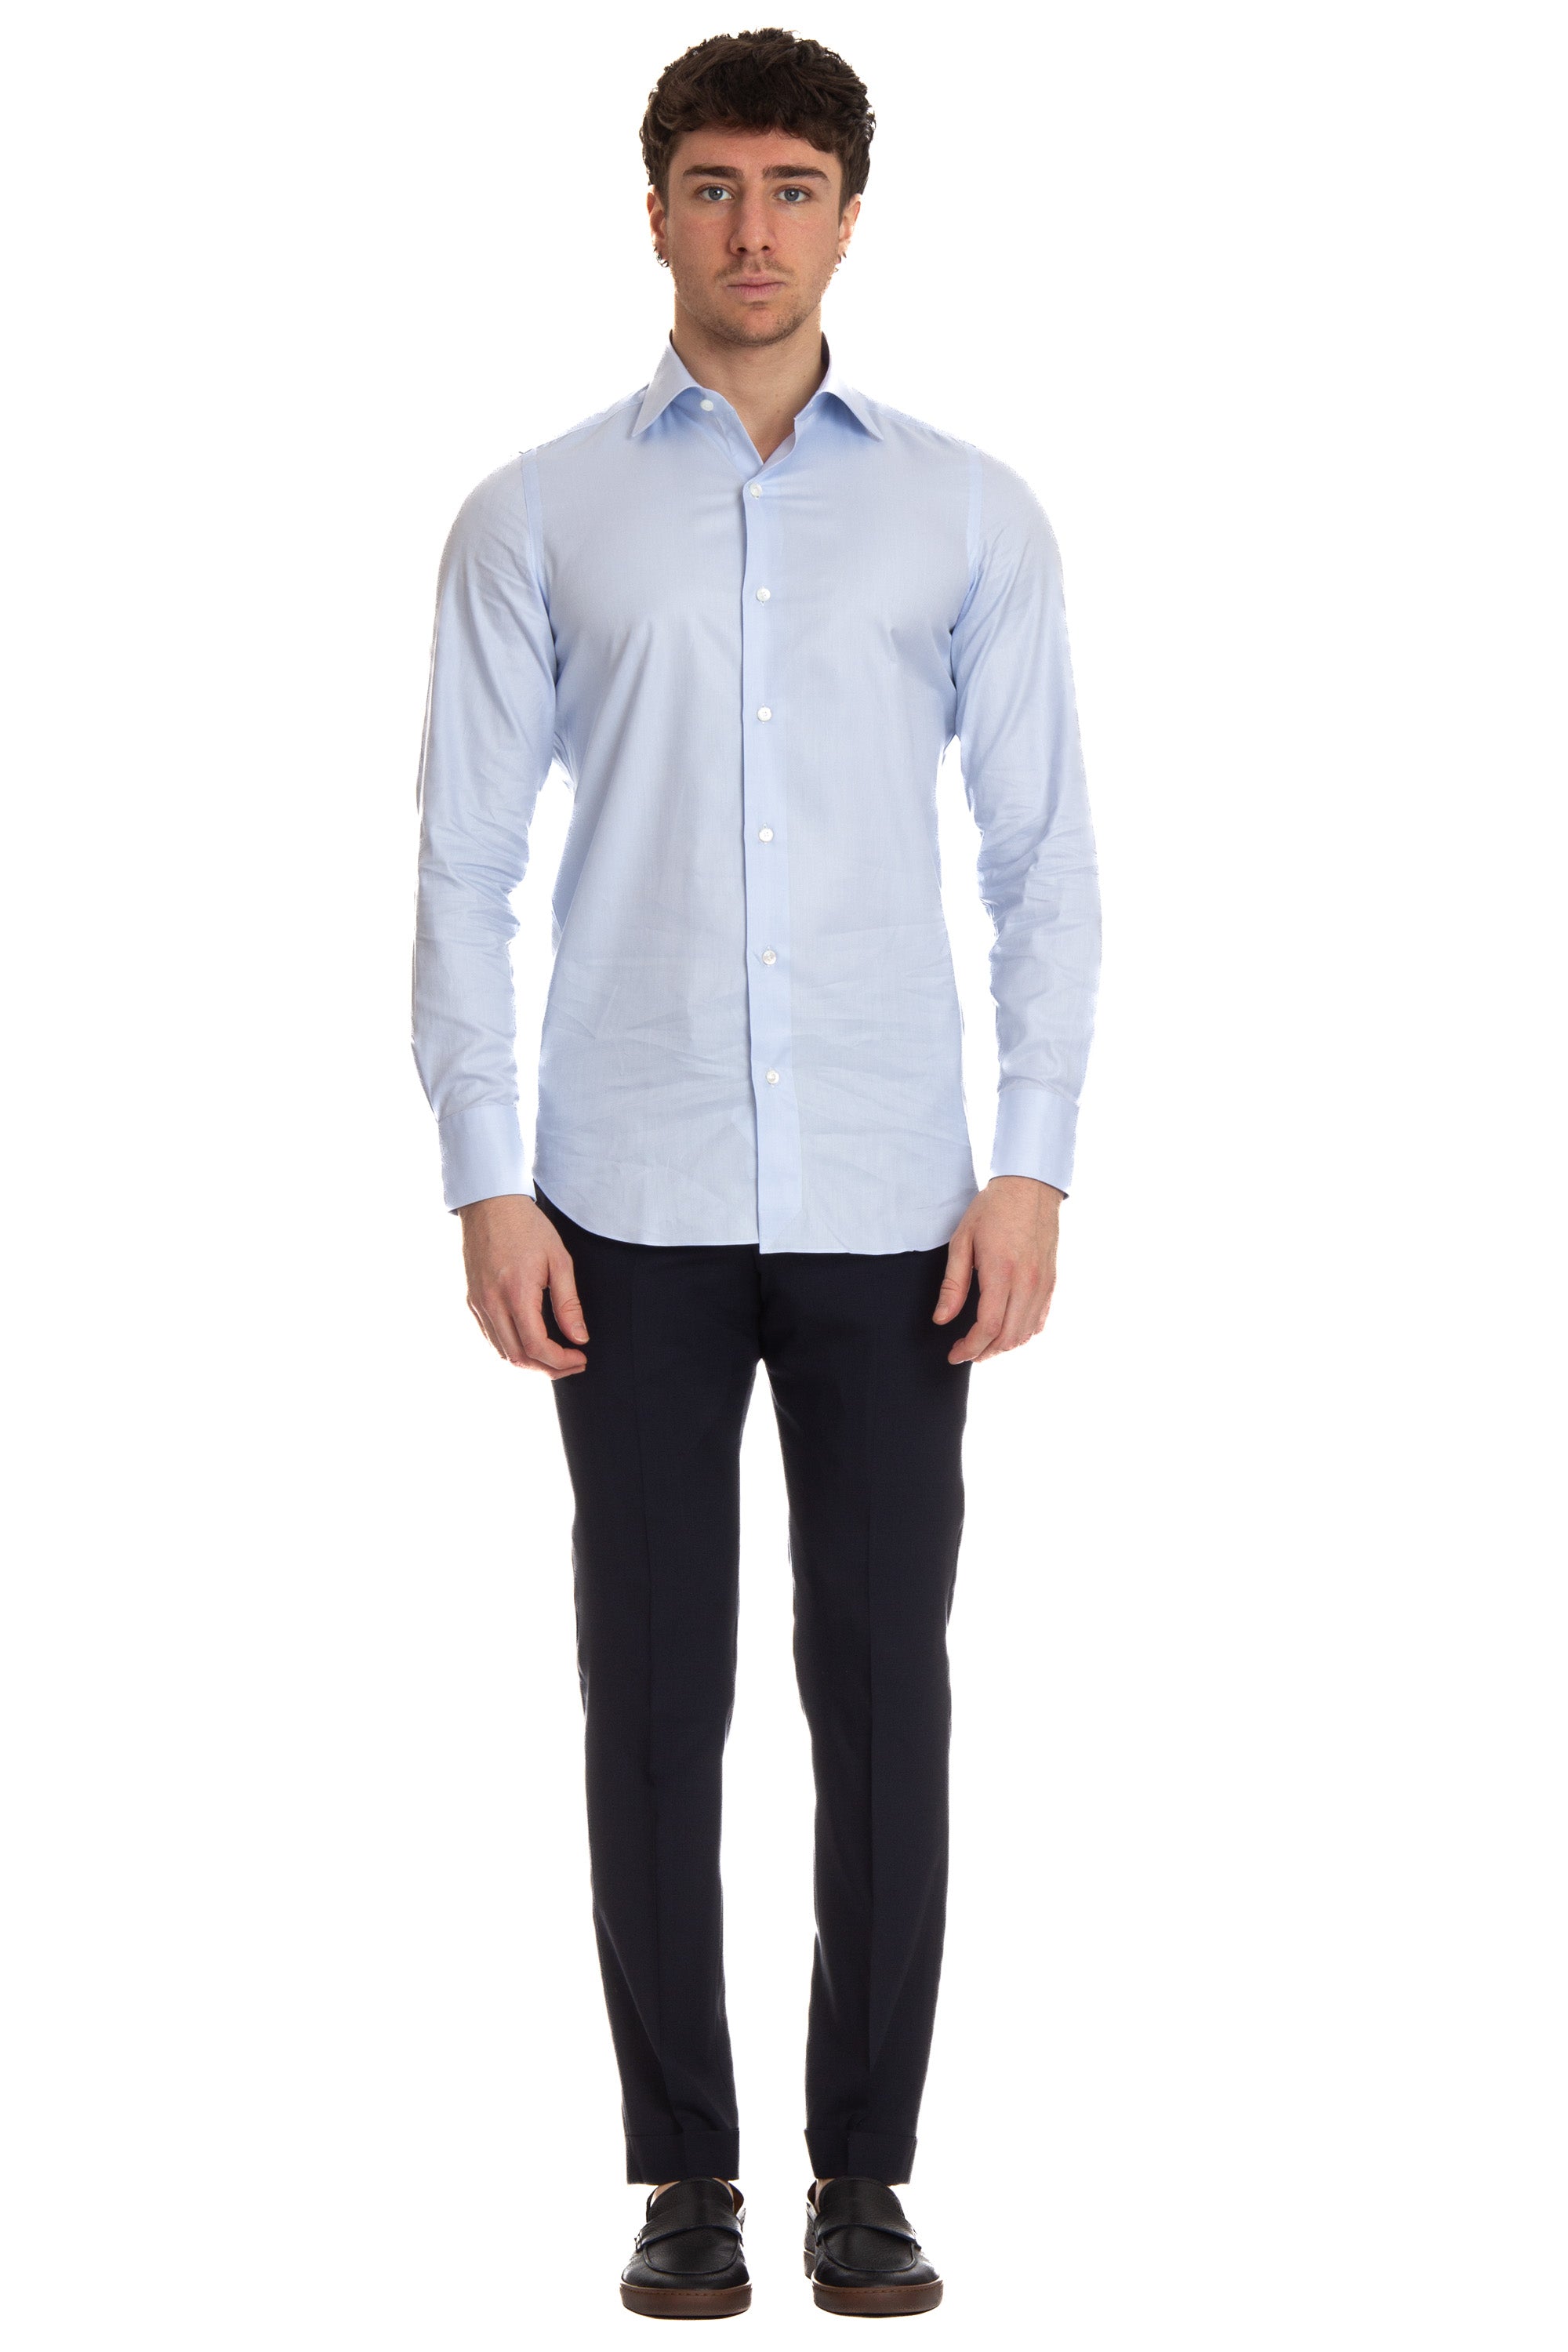 Tailored oxford shirt from the Milan line